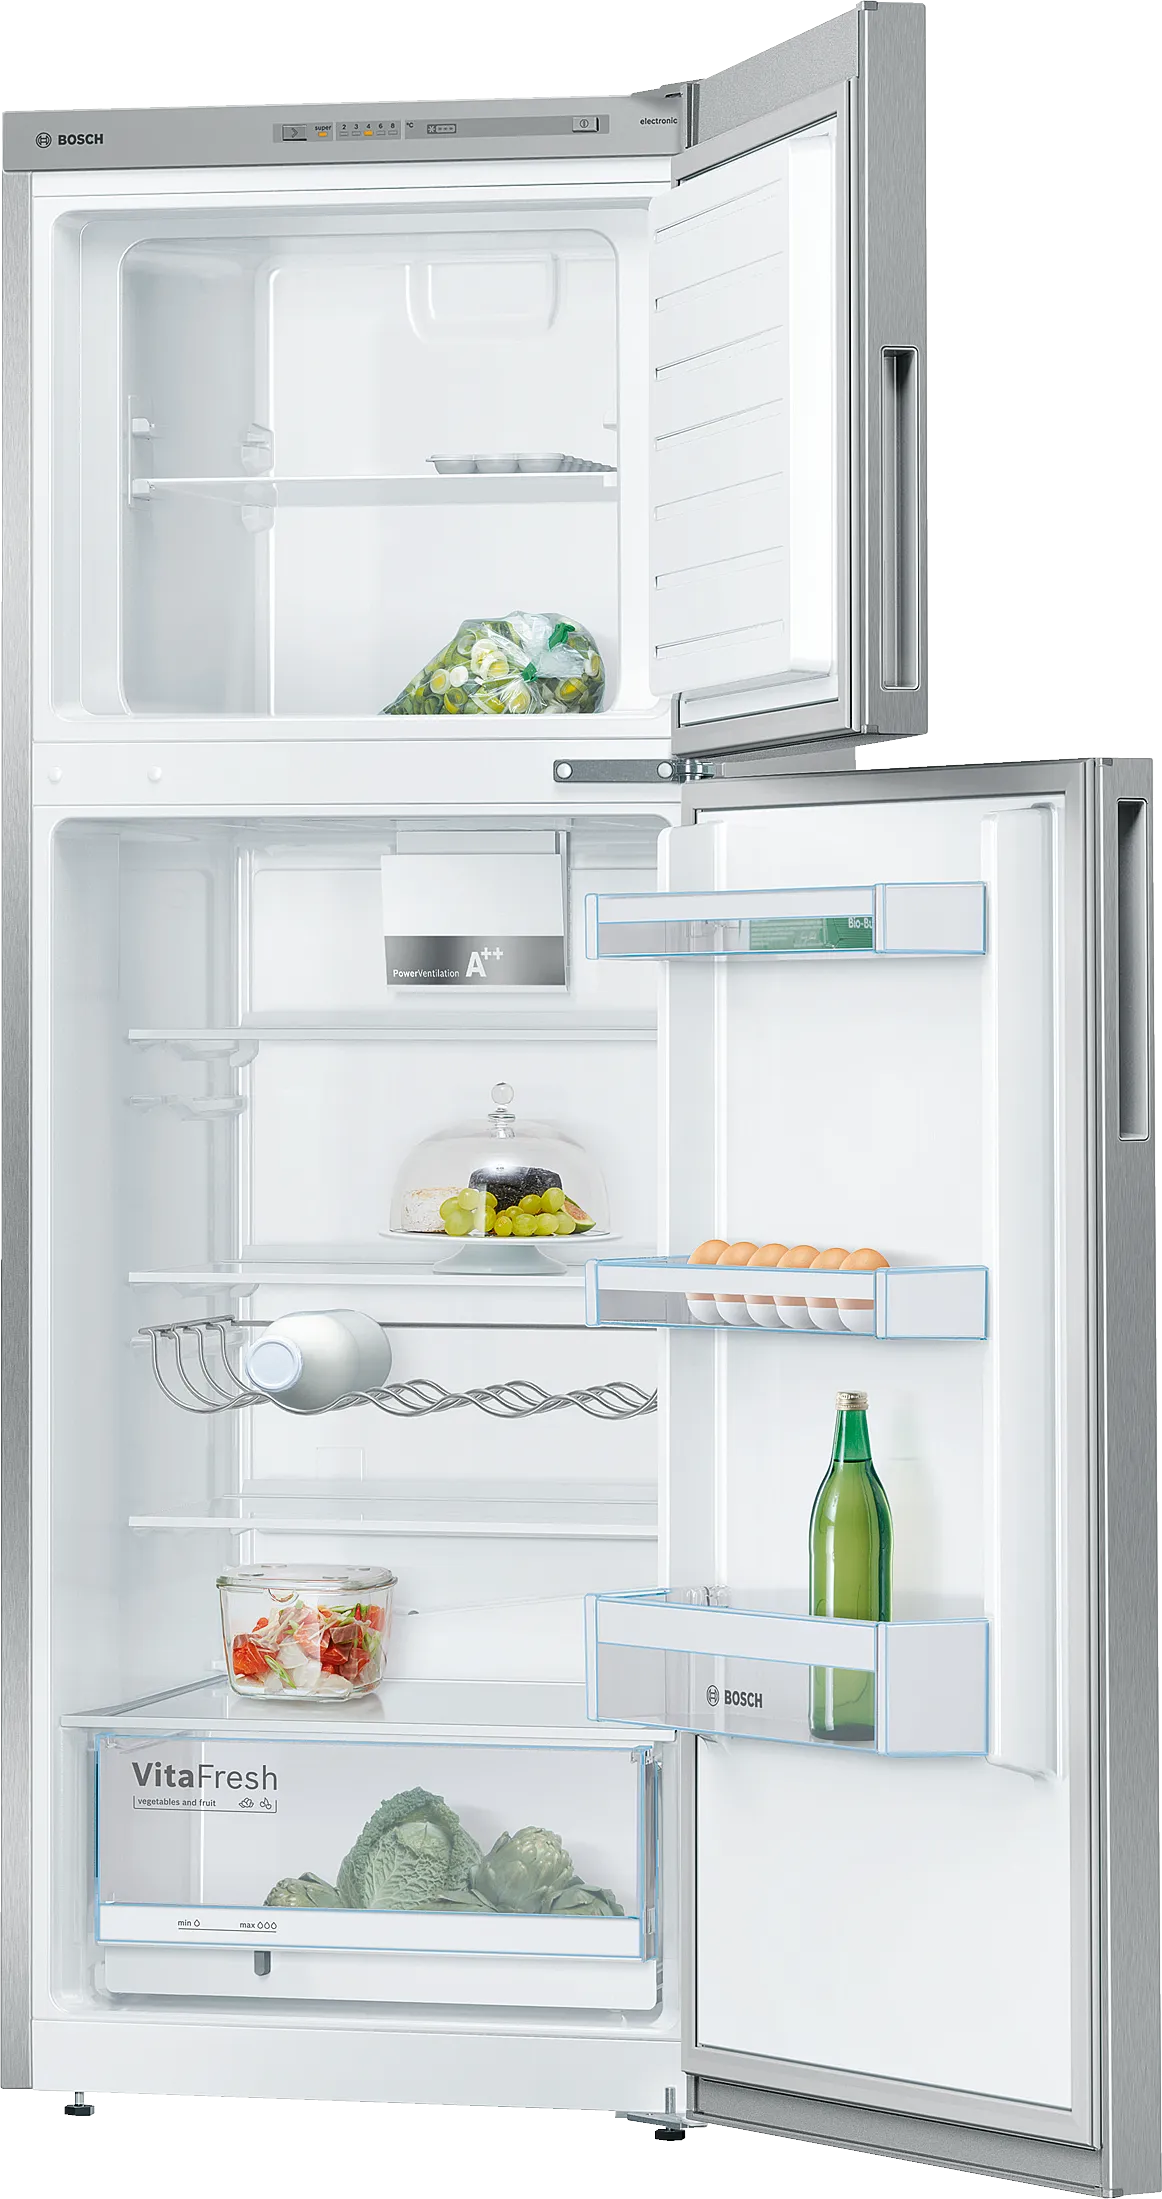 Series 4 free-standing fridge-freezer with freezer at top 161 x 60 cm Stainless steel look 